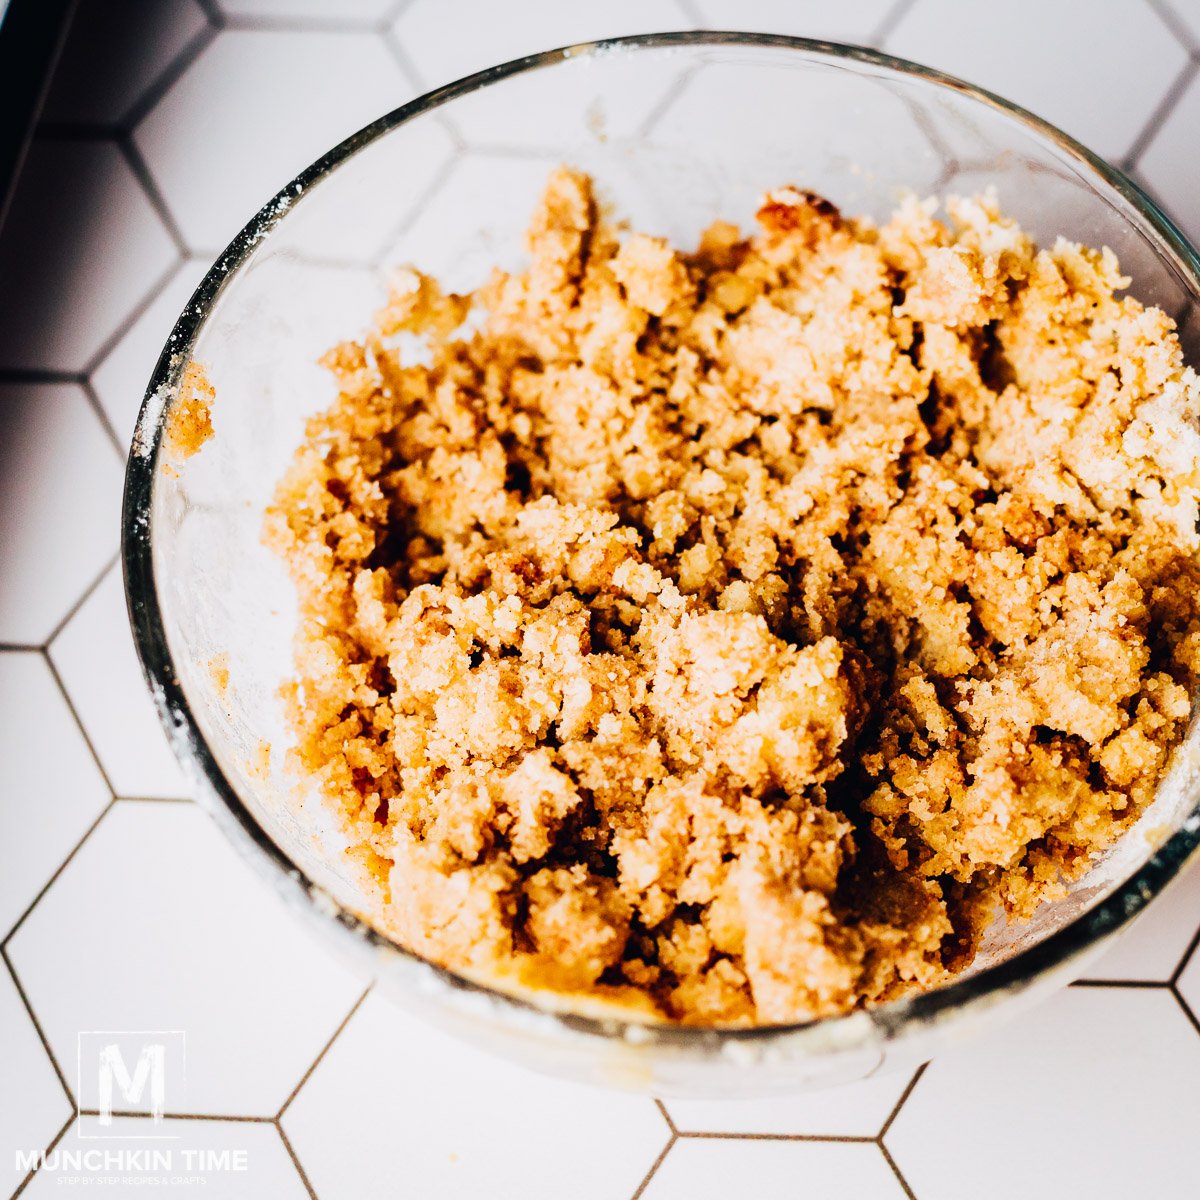 How to Make Streusel Topping